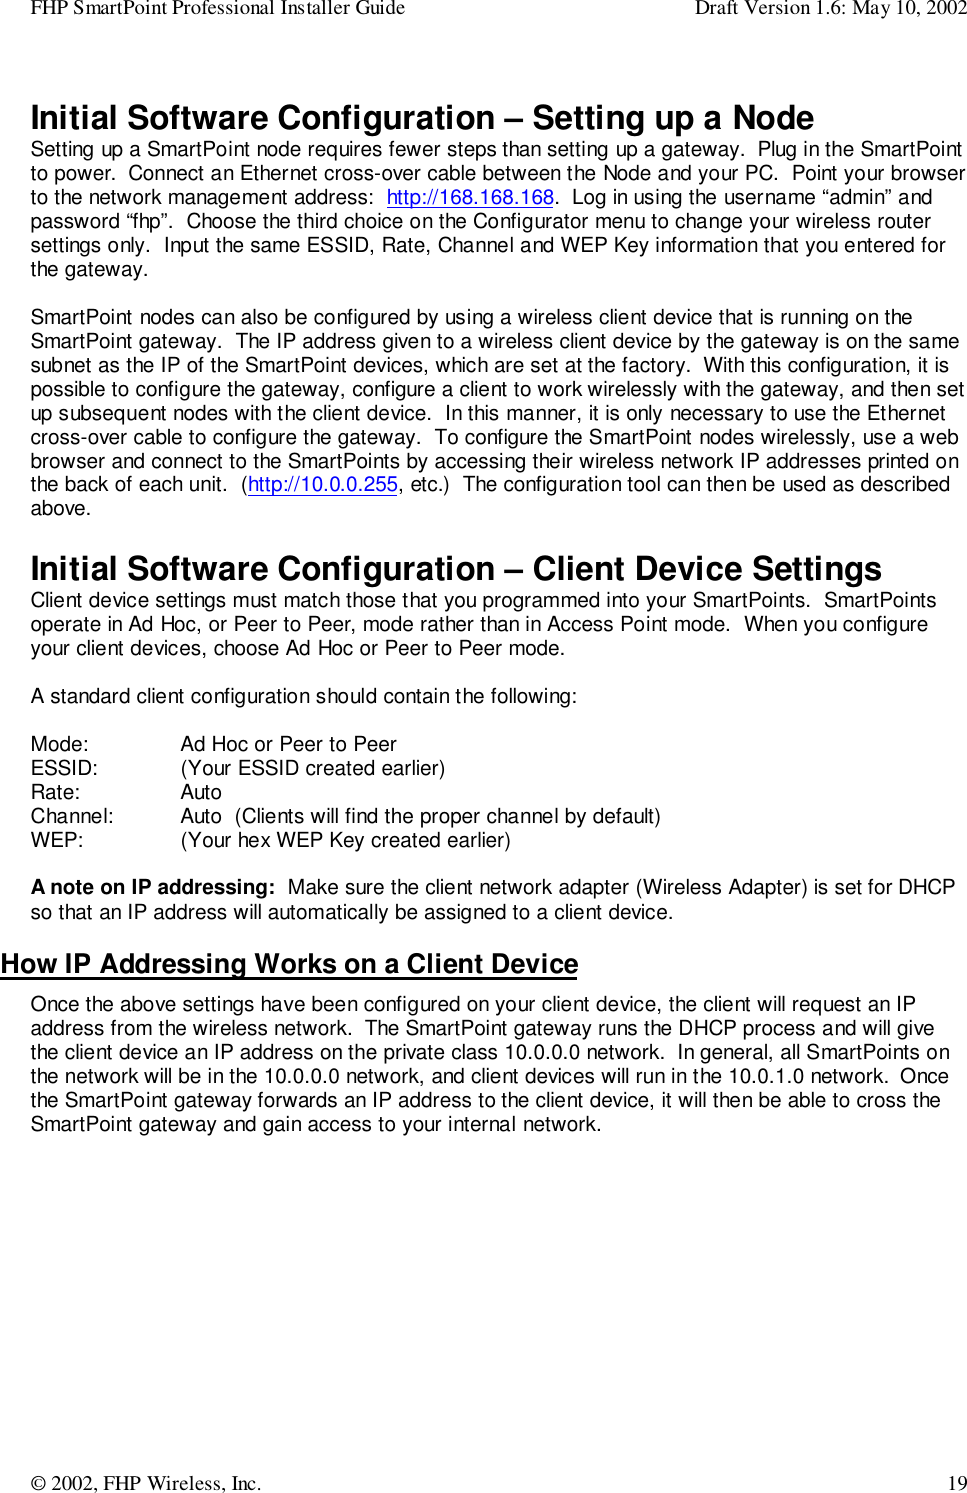 FHP SmartPoint Professional Installer Guide Draft Version 1.6: May 10, 2002© 2002, FHP Wireless, Inc. 19Initial Software Configuration – Setting up a NodeSetting up a SmartPoint node requires fewer steps than setting up a gateway.  Plug in the SmartPointto power.  Connect an Ethernet cross-over cable between the Node and your PC.  Point your browserto the network management address:  http://168.168.168.  Log in using the username “admin” andpassword “fhp”.  Choose the third choice on the Configurator menu to change your wireless routersettings only.  Input the same ESSID, Rate, Channel and WEP Key information that you entered forthe gateway.SmartPoint nodes can also be configured by using a wireless client device that is running on theSmartPoint gateway.  The IP address given to a wireless client device by the gateway is on the samesubnet as the IP of the SmartPoint devices, which are set at the factory.  With this configuration, it ispossible to configure the gateway, configure a client to work wirelessly with the gateway, and then setup subsequent nodes with the client device.  In this manner, it is only necessary to use the Ethernetcross-over cable to configure the gateway.  To configure the SmartPoint nodes wirelessly, use a webbrowser and connect to the SmartPoints by accessing their wireless network IP addresses printed onthe back of each unit.  (http://10.0.0.255, etc.)  The configuration tool can then be used as describedabove.Initial Software Configuration – Client Device SettingsClient device settings must match those that you programmed into your SmartPoints.  SmartPointsoperate in Ad Hoc, or Peer to Peer, mode rather than in Access Point mode.  When you configureyour client devices, choose Ad Hoc or Peer to Peer mode.A standard client configuration should contain the following:Mode:  Ad Hoc or Peer to PeerESSID:  (Your ESSID created earlier)Rate: AutoChannel: Auto  (Clients will find the proper channel by default)WEP:  (Your hex WEP Key created earlier)A note on IP addressing:  Make sure the client network adapter (Wireless Adapter) is set for DHCPso that an IP address will automatically be assigned to a client device.How IP Addressing Works on a Client DeviceOnce the above settings have been configured on your client device, the client will request an IPaddress from the wireless network.  The SmartPoint gateway runs the DHCP process and will givethe client device an IP address on the private class 10.0.0.0 network.  In general, all SmartPoints onthe network will be in the 10.0.0.0 network, and client devices will run in the 10.0.1.0 network.  Oncethe SmartPoint gateway forwards an IP address to the client device, it will then be able to cross theSmartPoint gateway and gain access to your internal network.